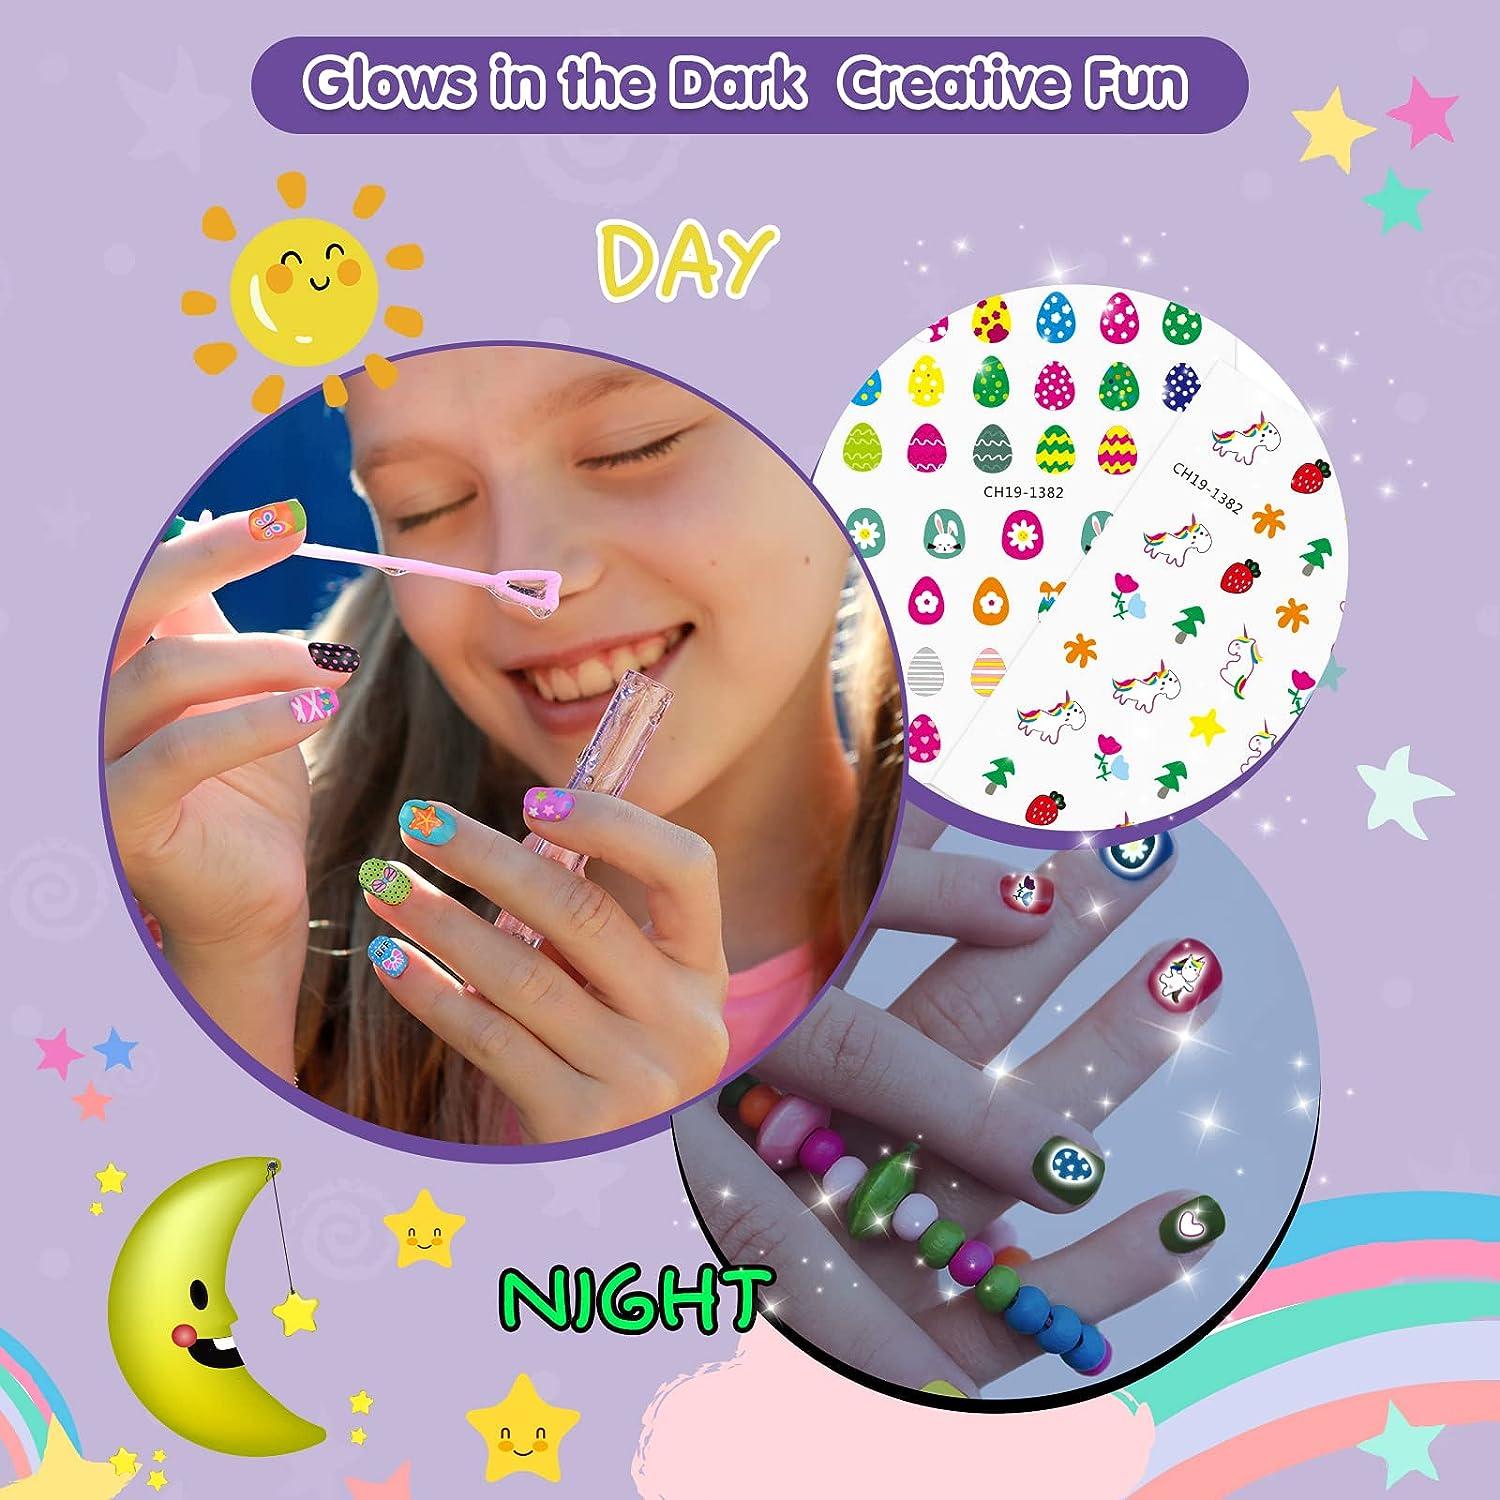  BATTOP Kids Nail Polish Set Girls Nail Art Kit with Polish,  Pen, Glitter, Nail Art Sticker and 3D Decoration, Cool Gifts Ideas for Girls  Ages 7-15 : Beauty & Personal Care